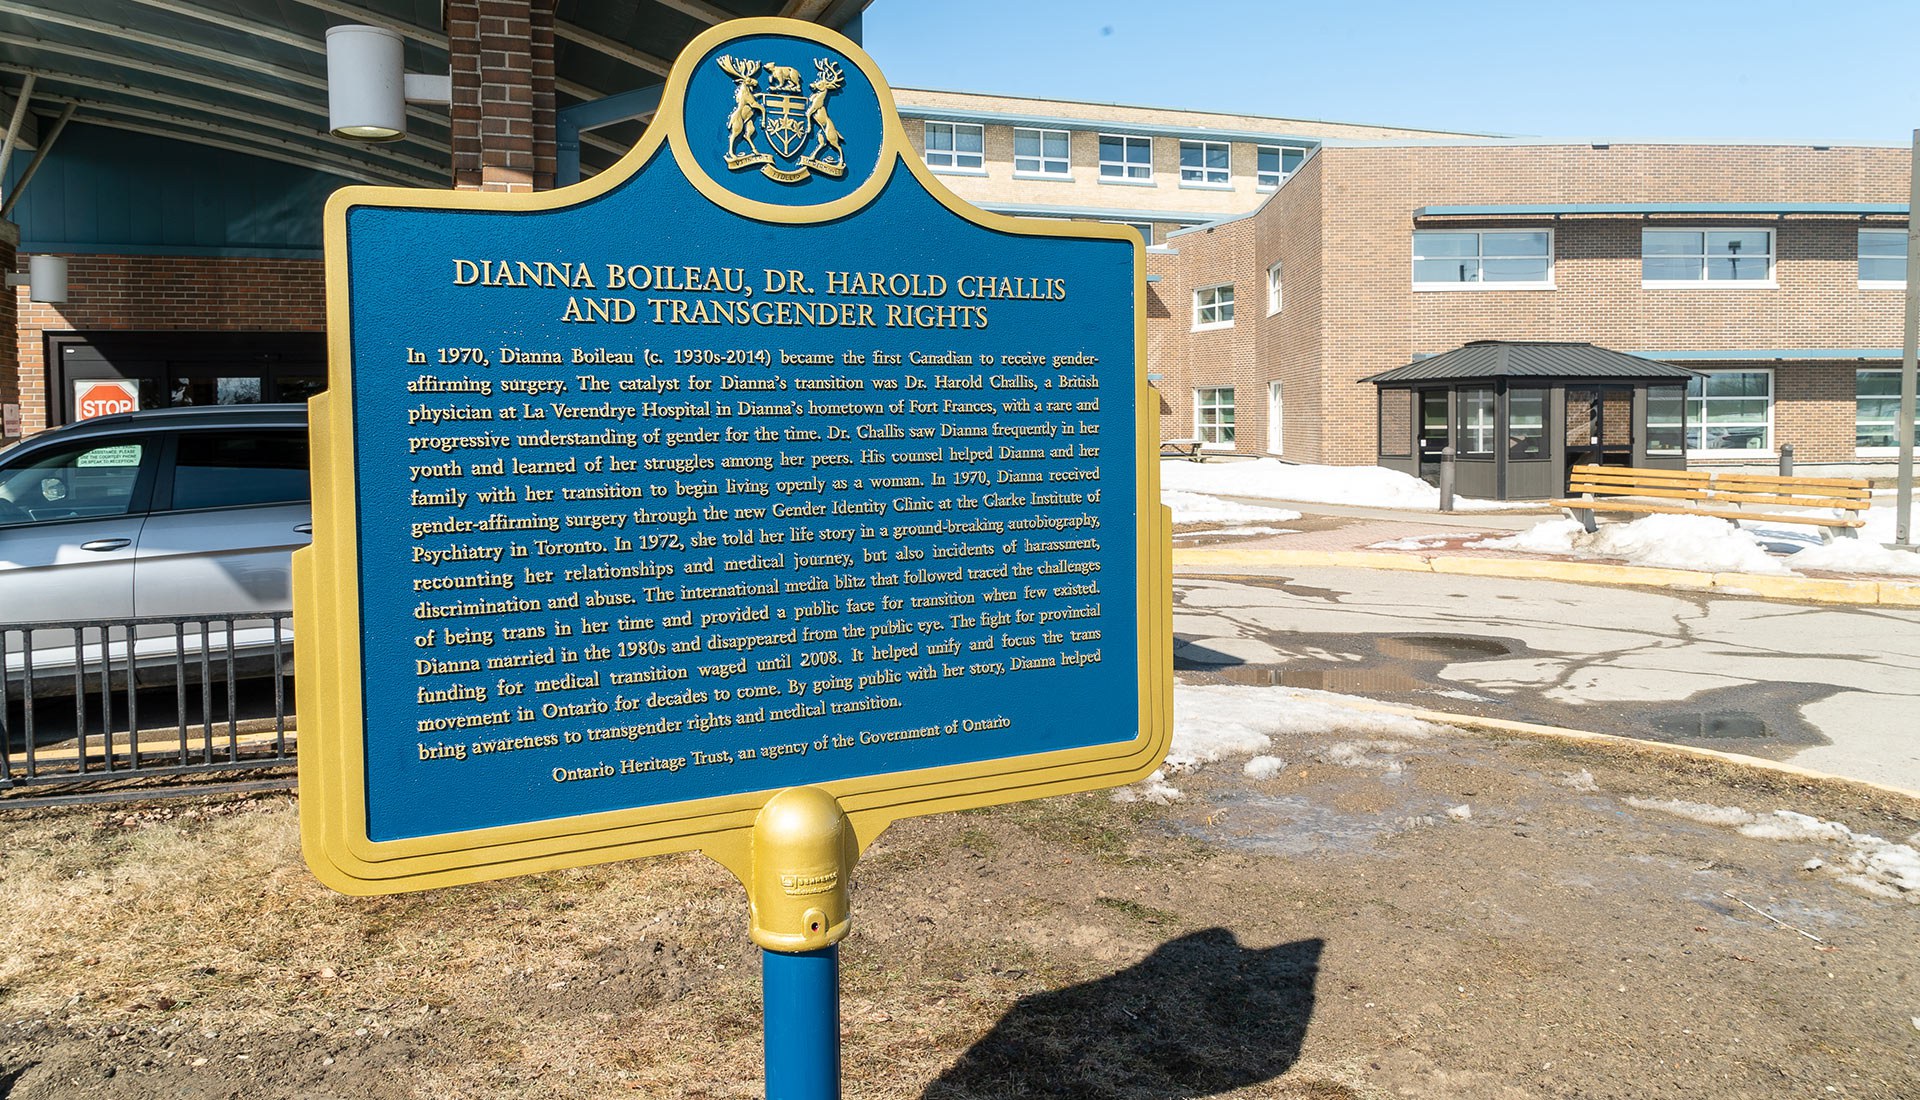 Dianna Boileau, Dr. Harold Challis and Transgender Rights (plaque unveiling in March 2023)